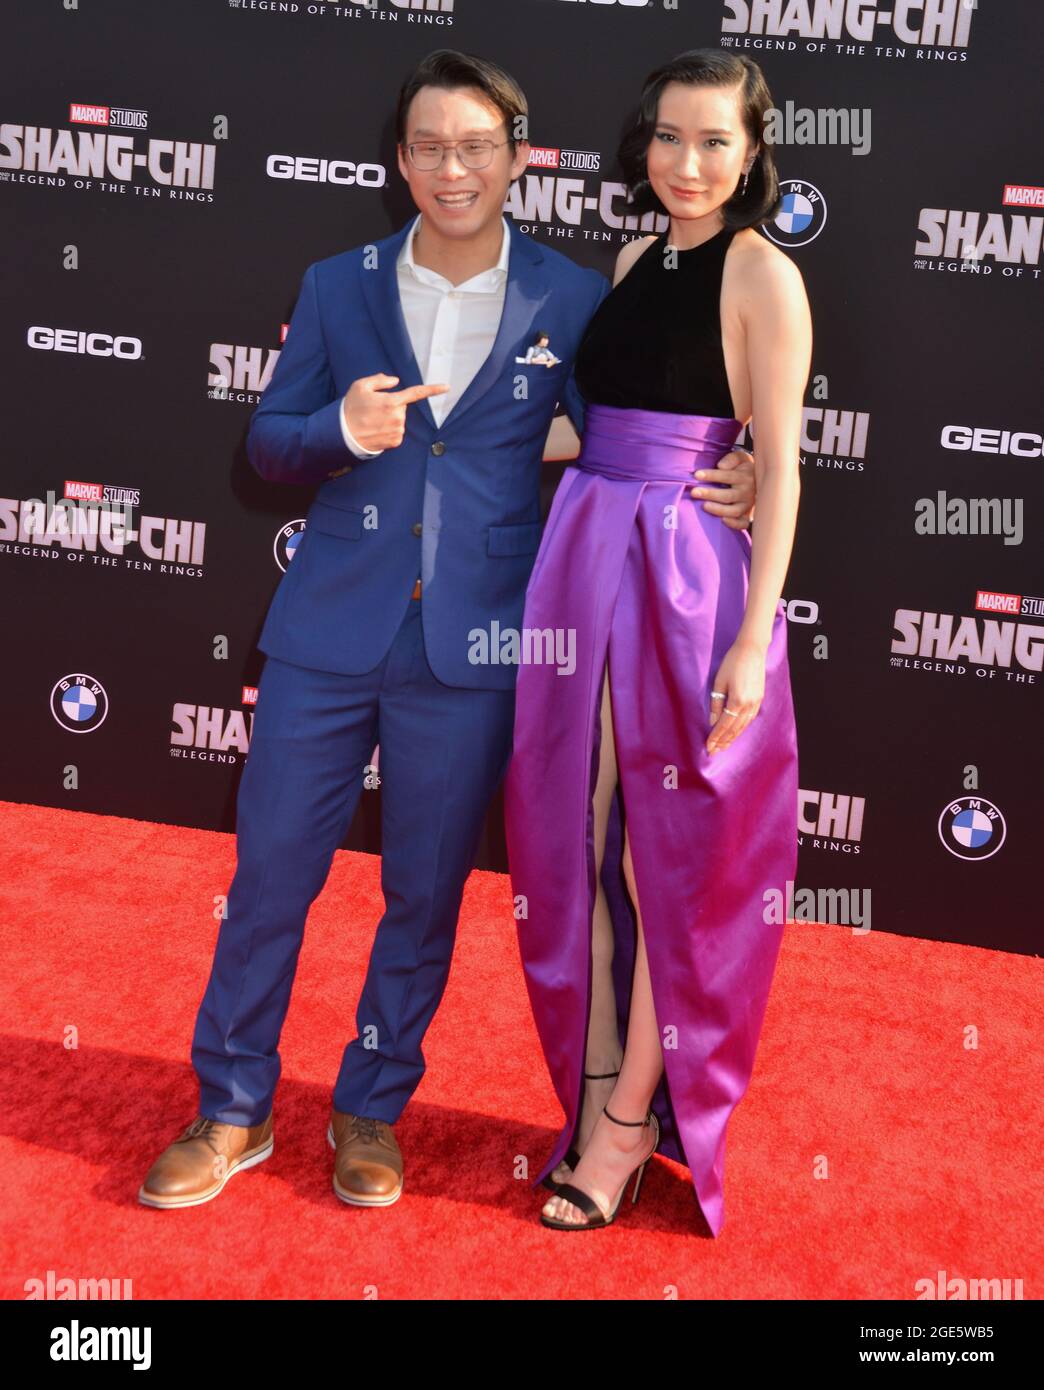 Los Angeles, USA. 17th Aug, 2021. Meng'er Ziang and husband attends the Disney Marvel Premiere of Shang-Chi and the Legend of the Ten Rings at the El Capitan Theatre in Los Angeles. August 16, 2021. Credit: Tsuni/USA/Alamy Live News Stock Photo